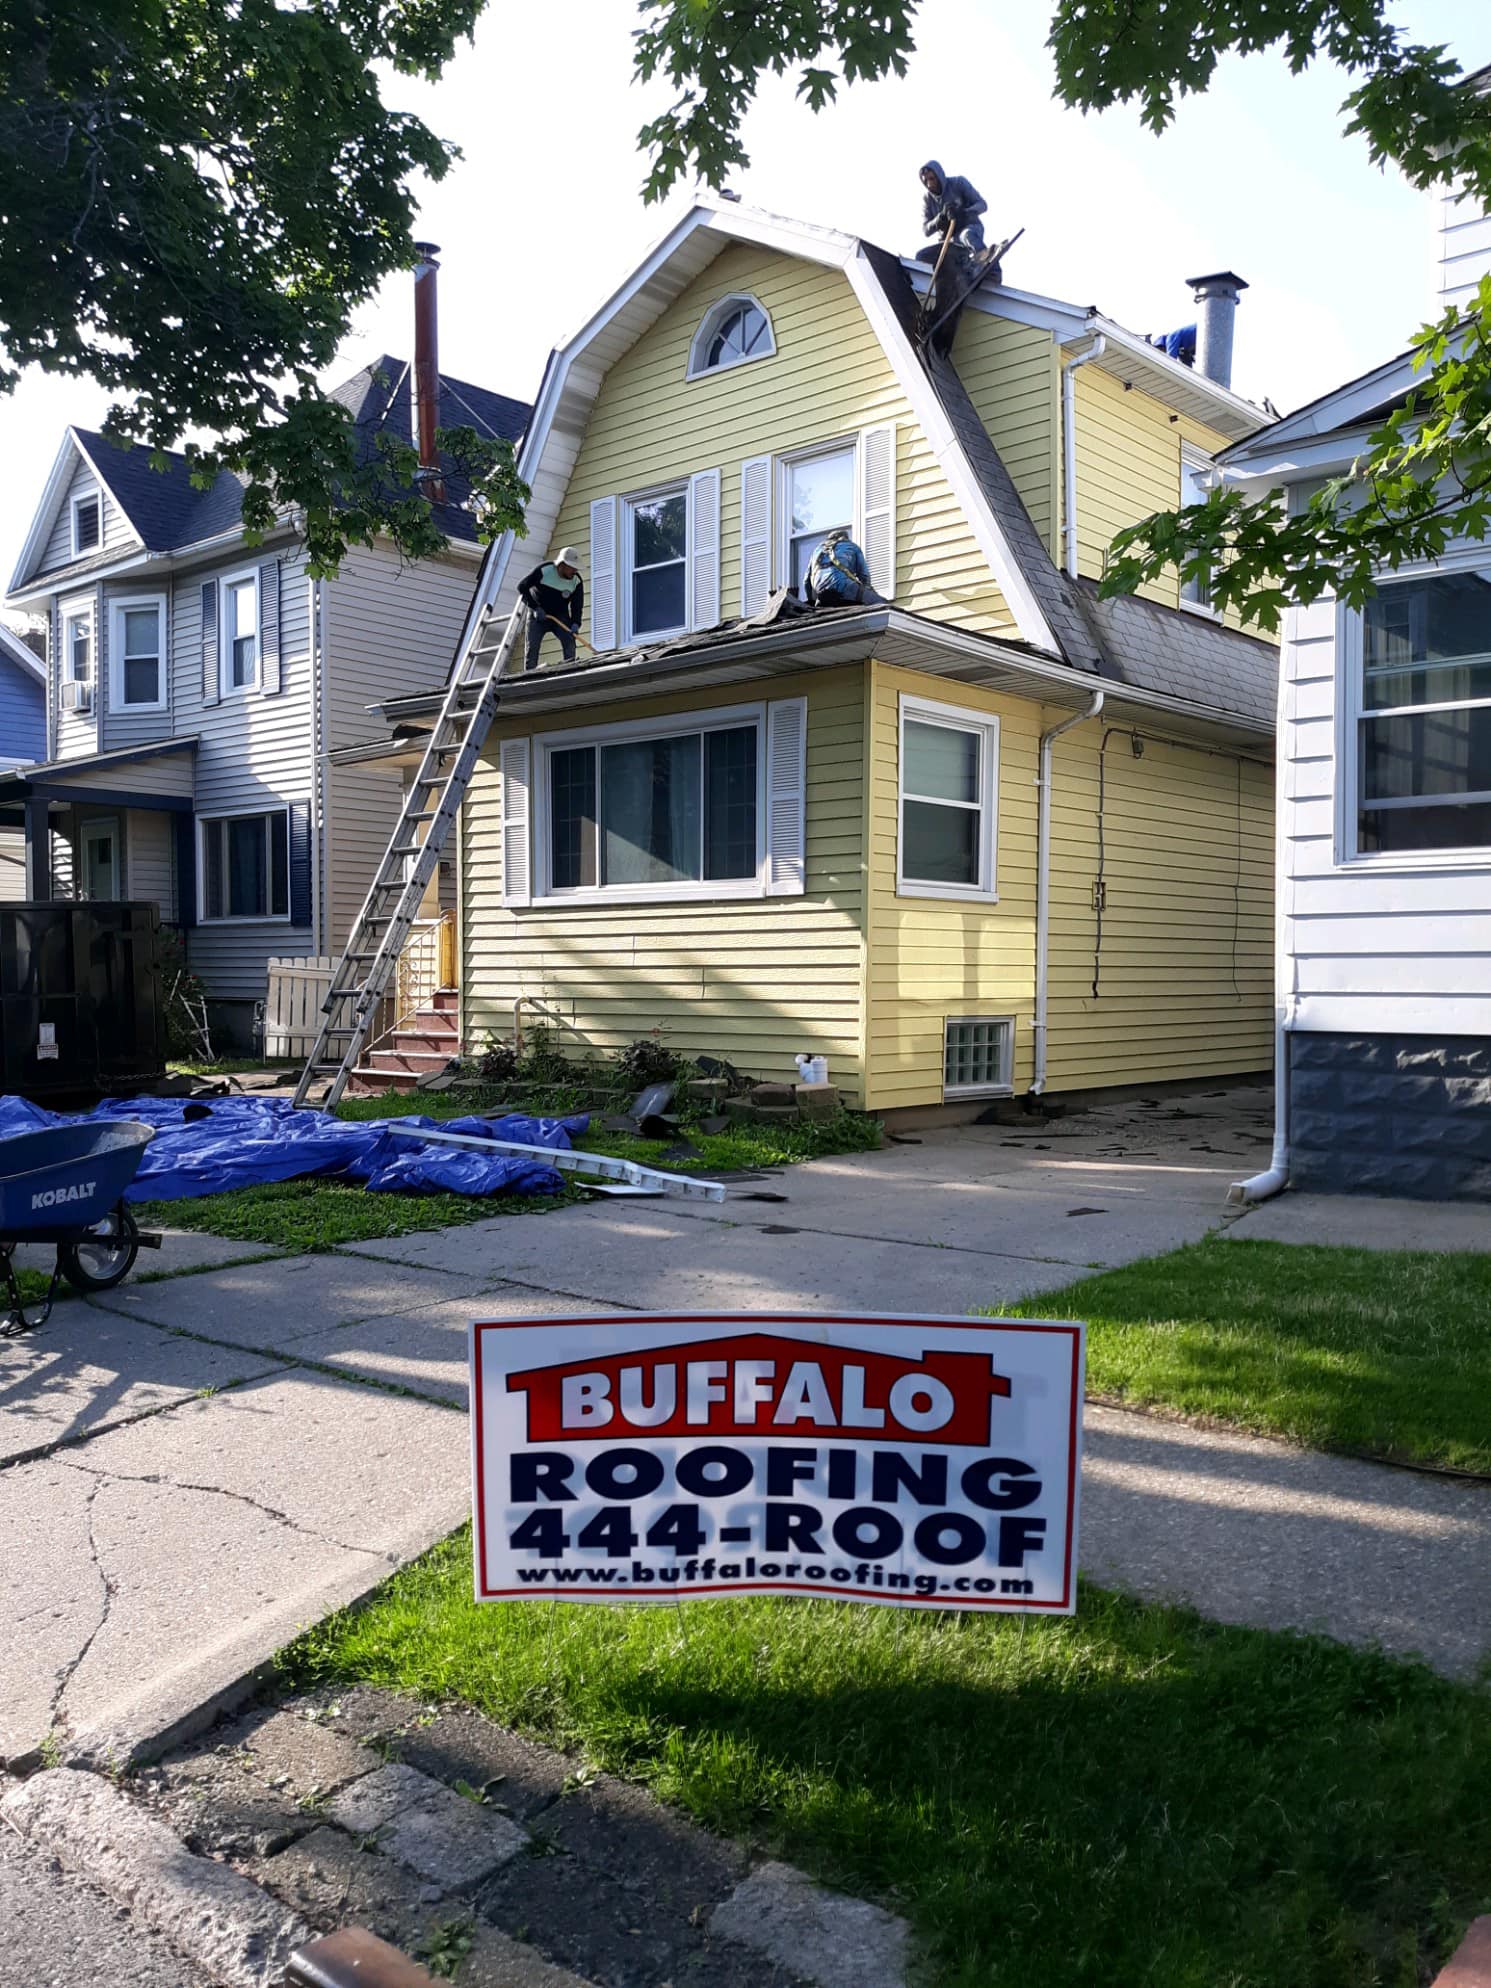 Buffalo Roofing - Residential Roofing Professionals